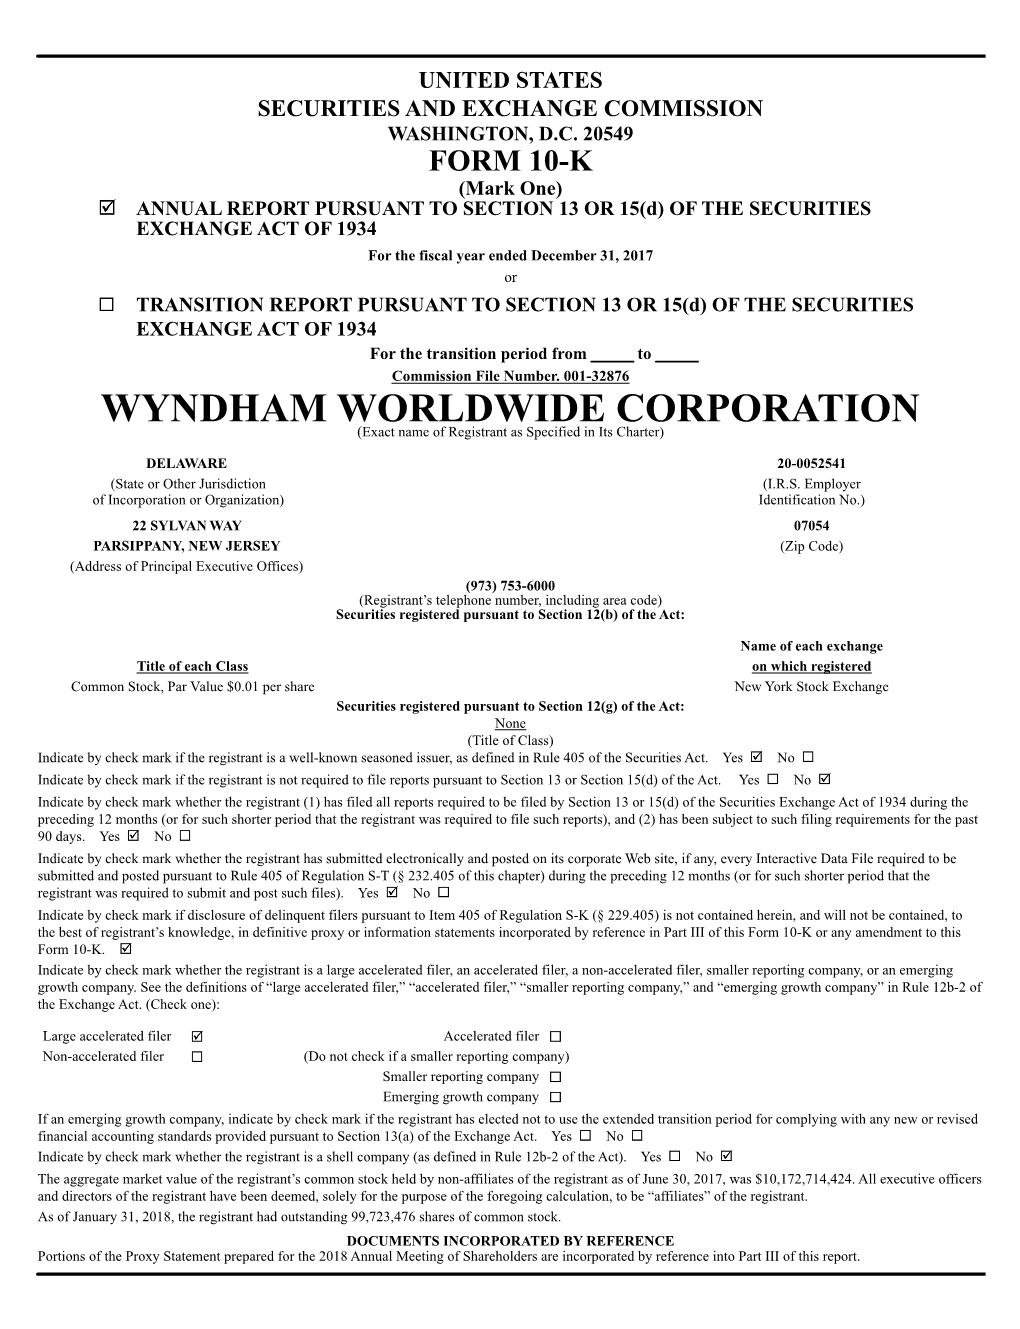 WYNDHAM WORLDWIDE CORPORATION (Exact Name of Registrant As Specified in Its Charter)